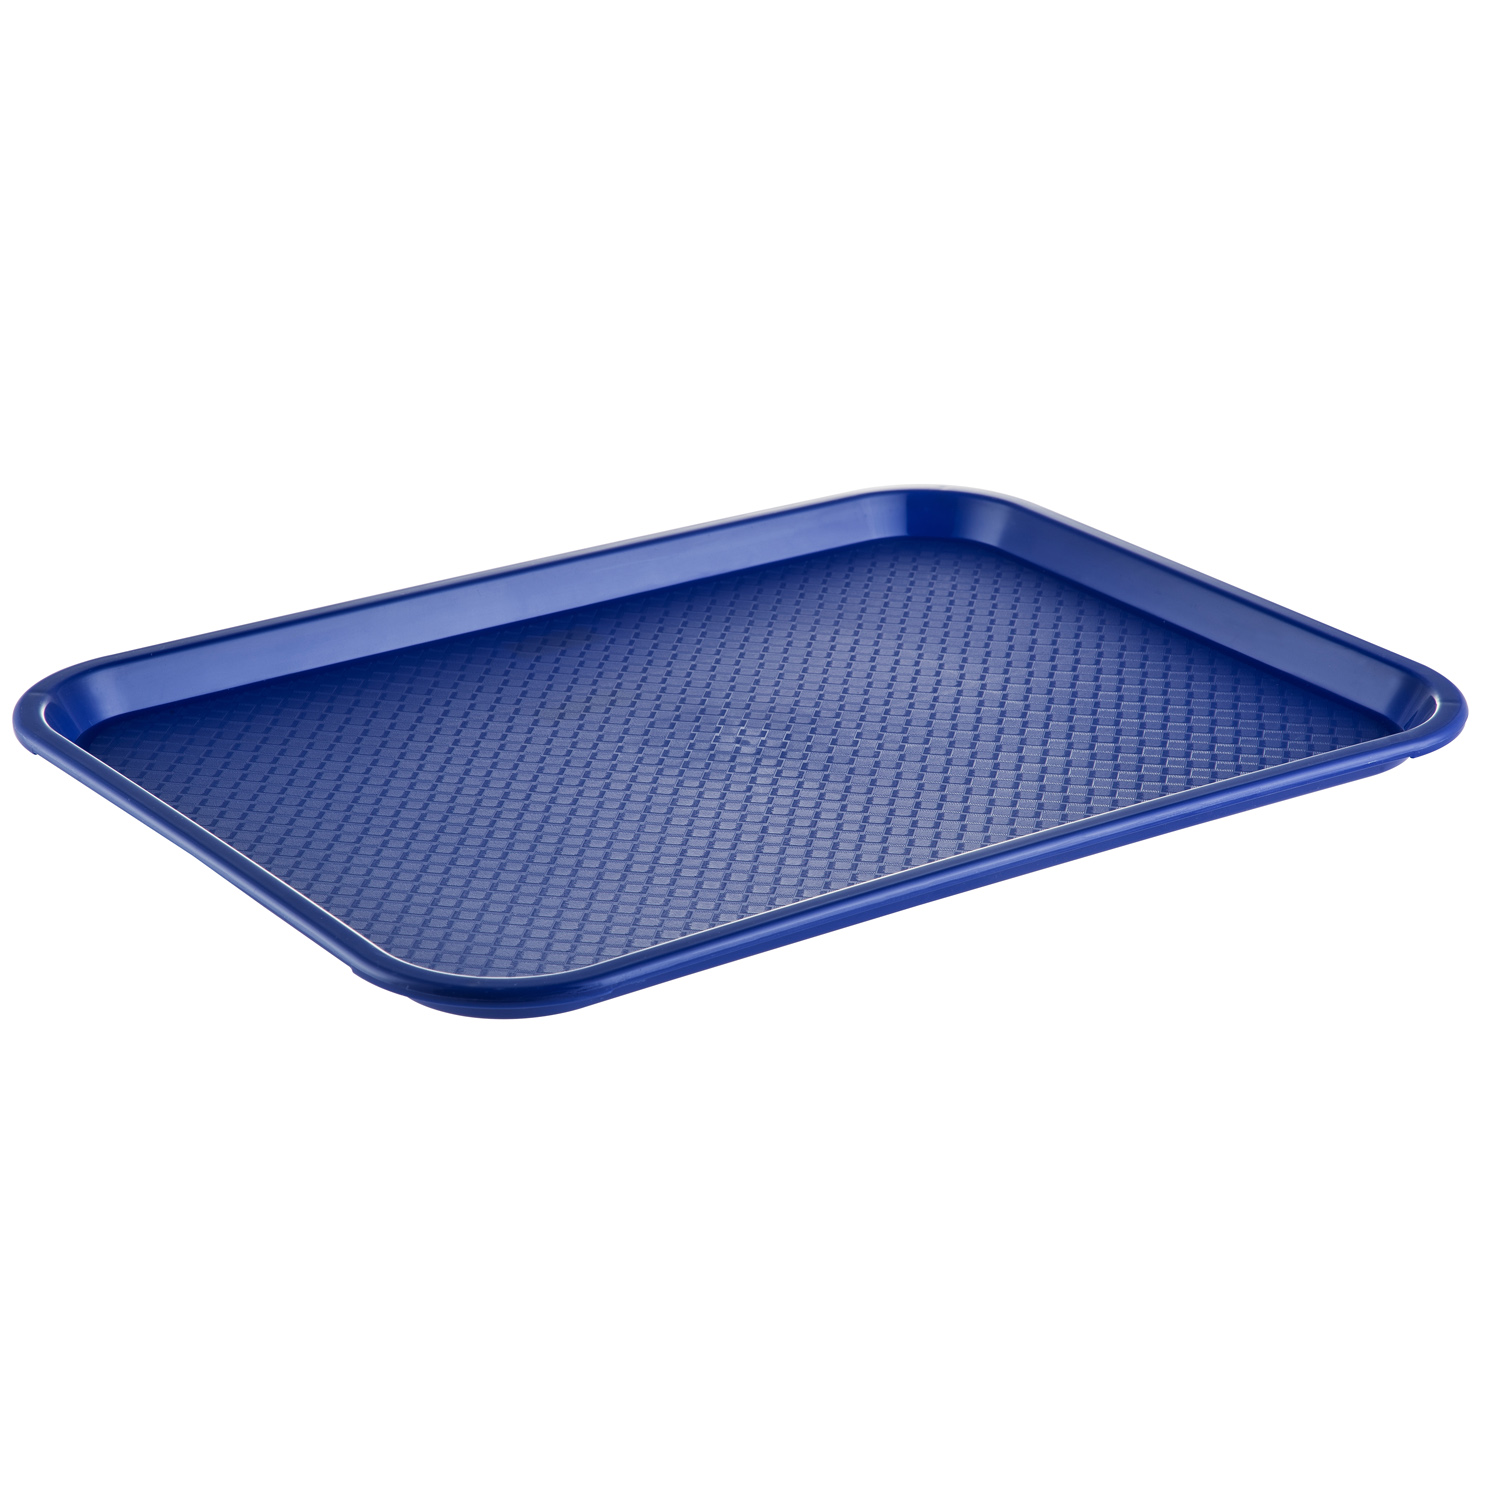 CAC China DSPT-1216B Blue Fast Food/Cafeteria Tray, 16" x 12"